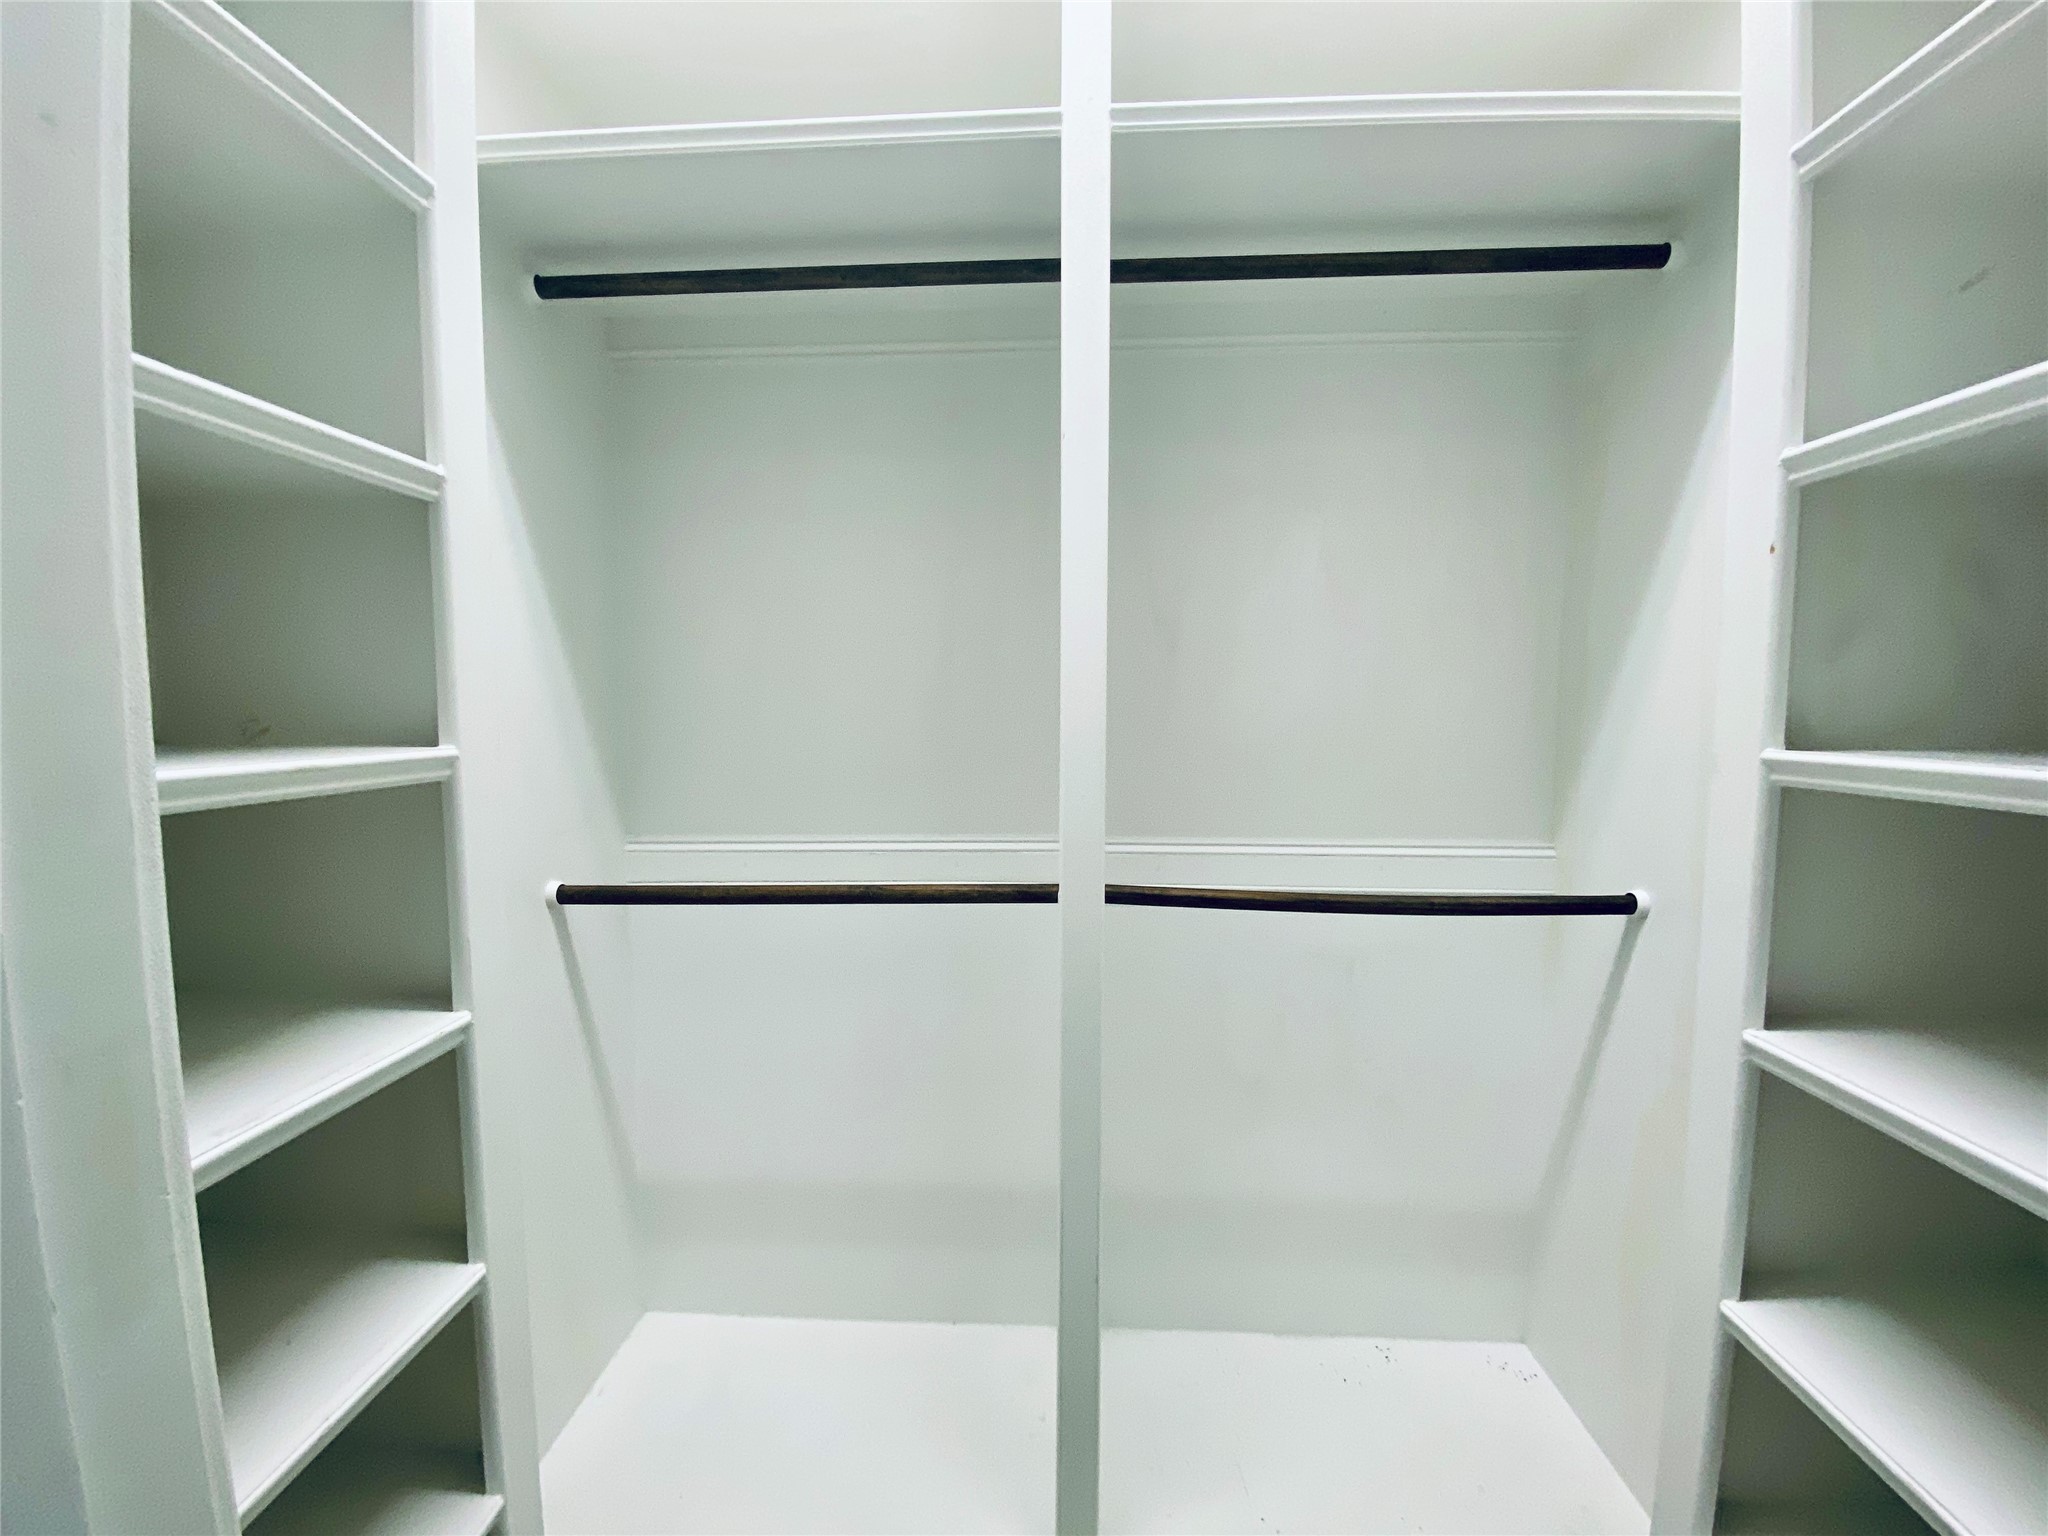 The second walk-in closet offers ample space for all your storage needs.